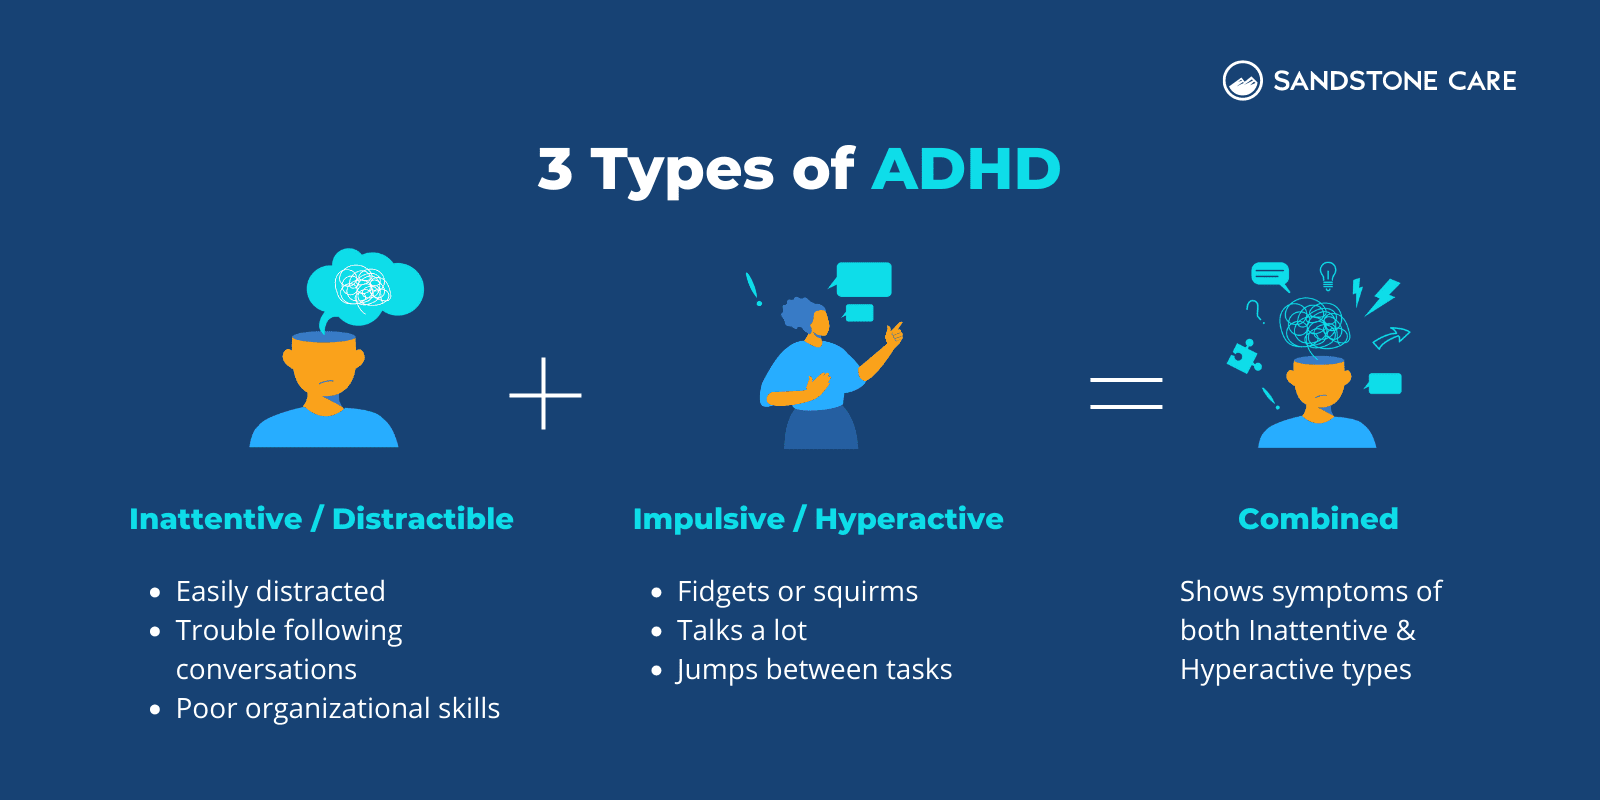 3 Types of ADHD explained with relevant digital illustrations